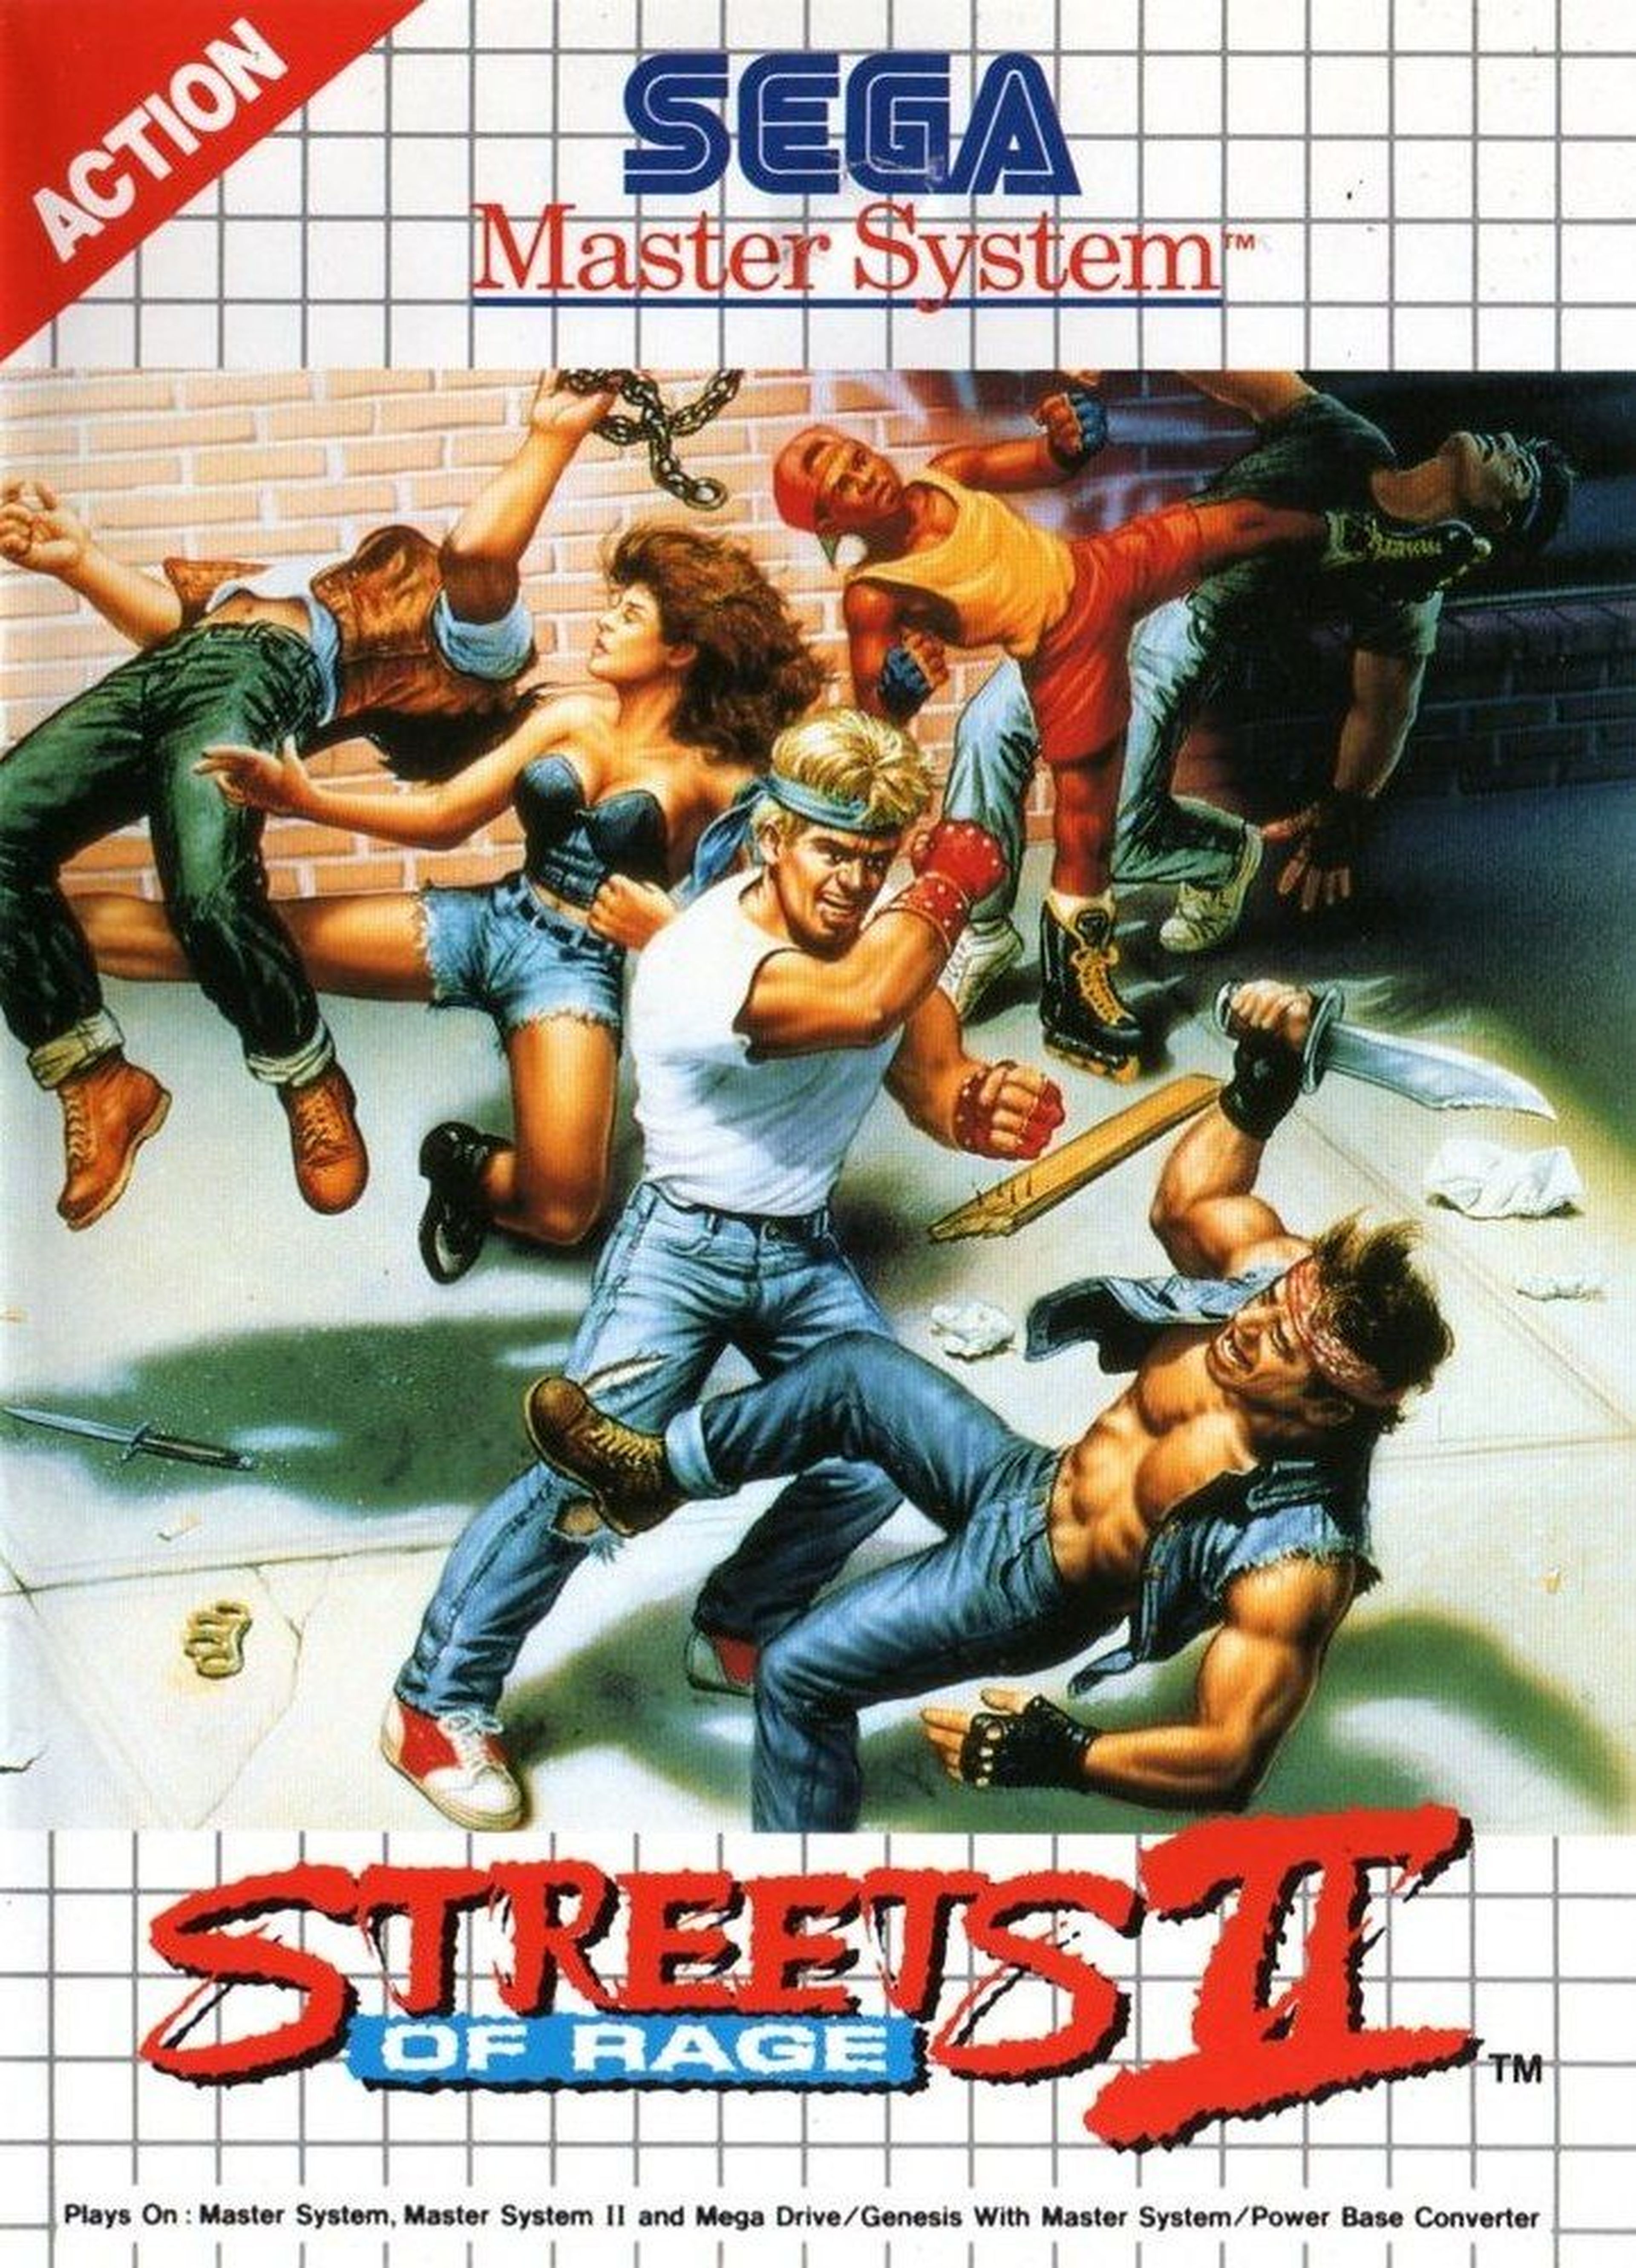 TIO BRUNO THE END streets of rage II